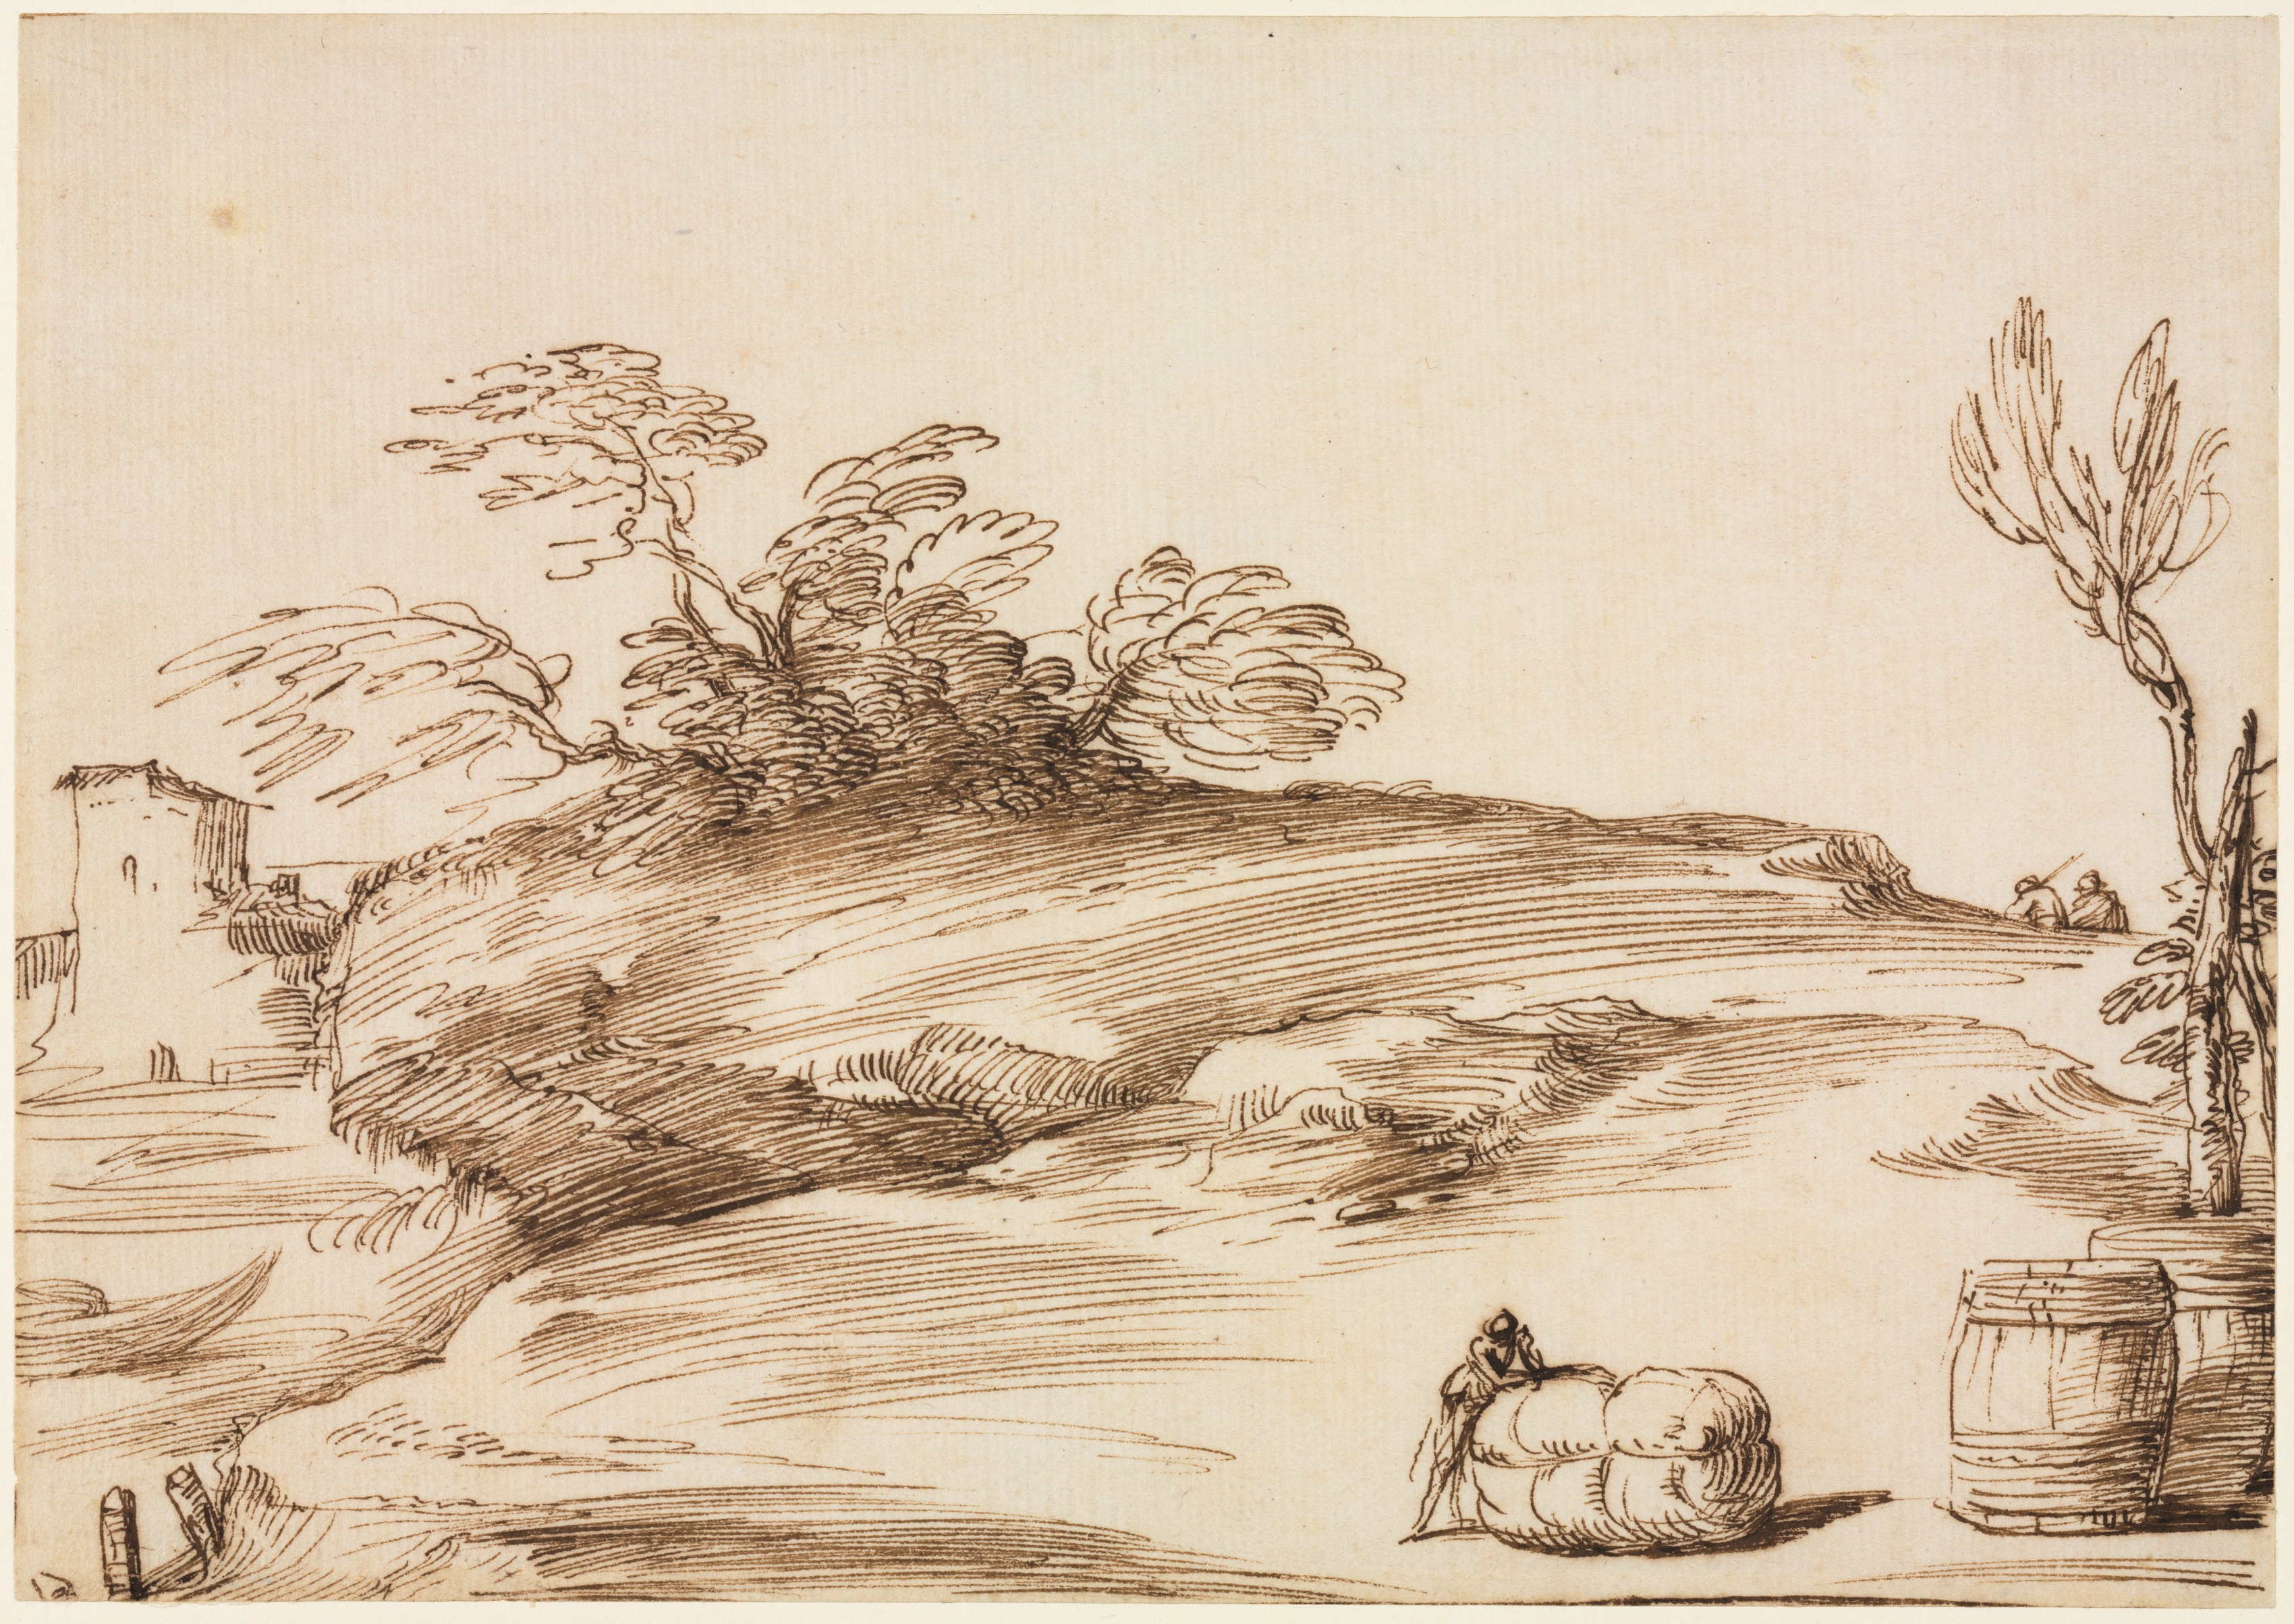 Landscape with a Man Leaning on a Bale